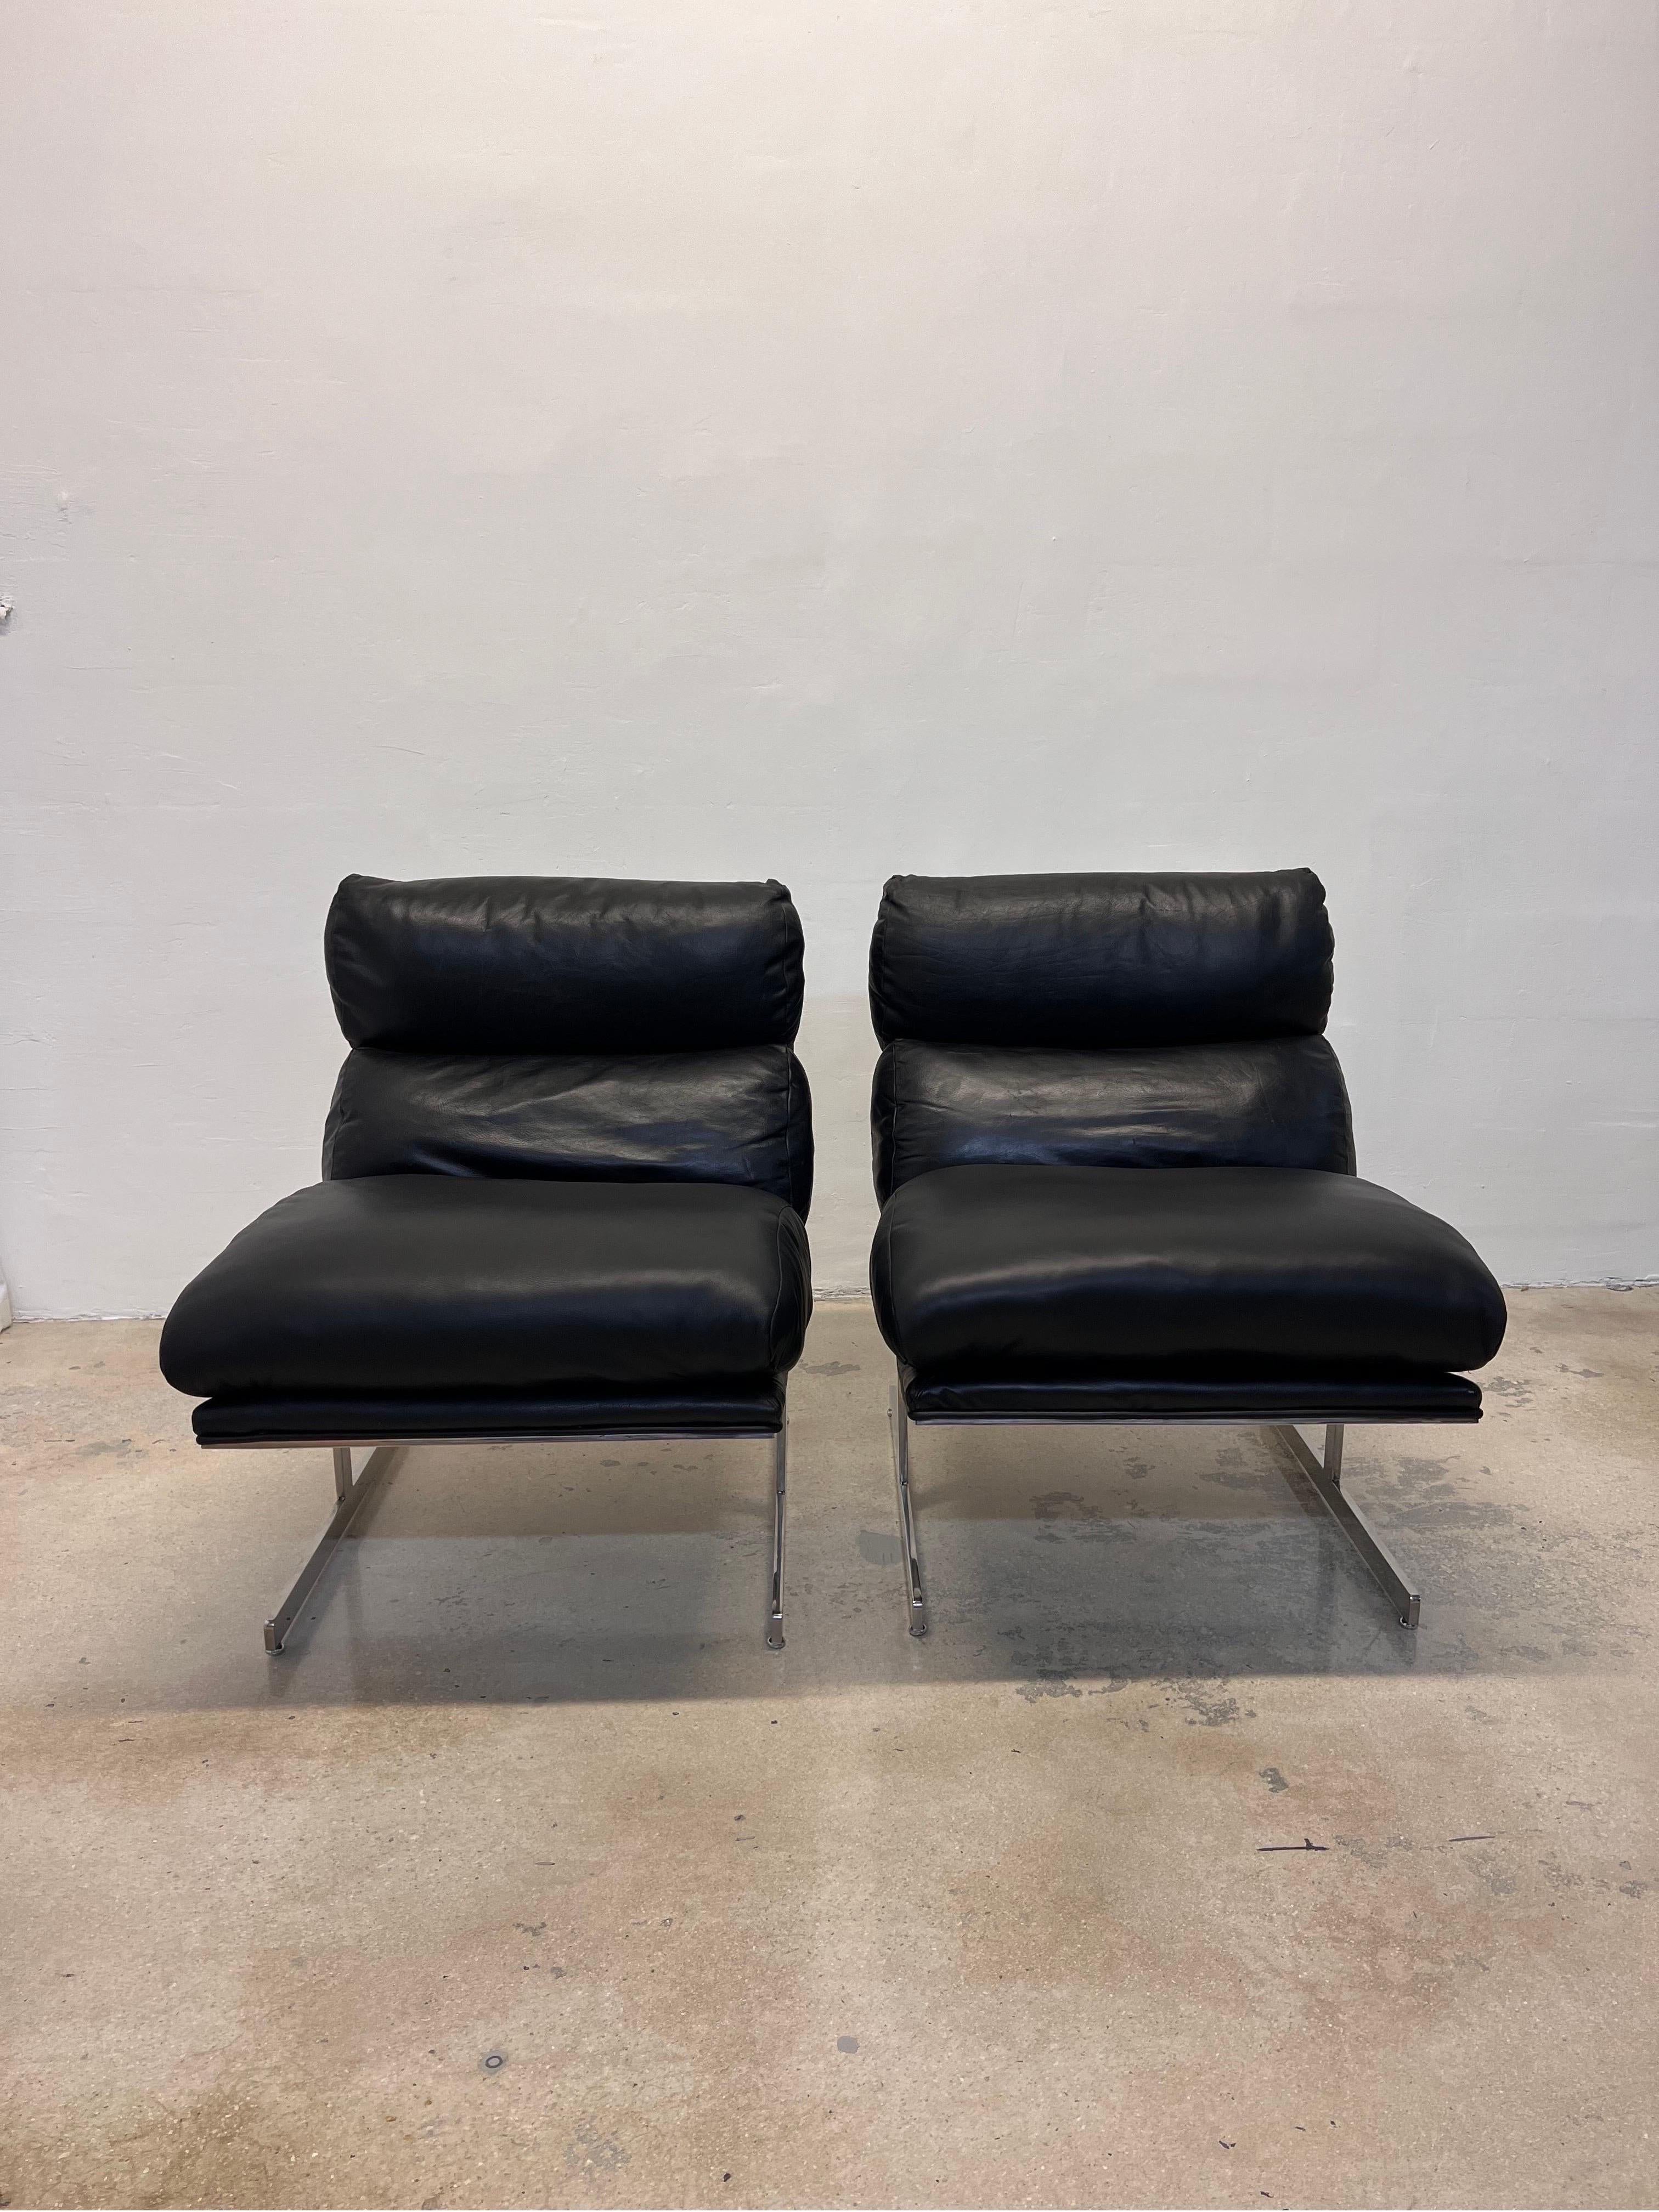 Pair of black leather and chrome Arc lounge chairs designed by Kipp Stewart and manufactured by Directional. 

The leather backrest and leather covered frame are original. The leather seat has been reupholstered with new leather and foam/down